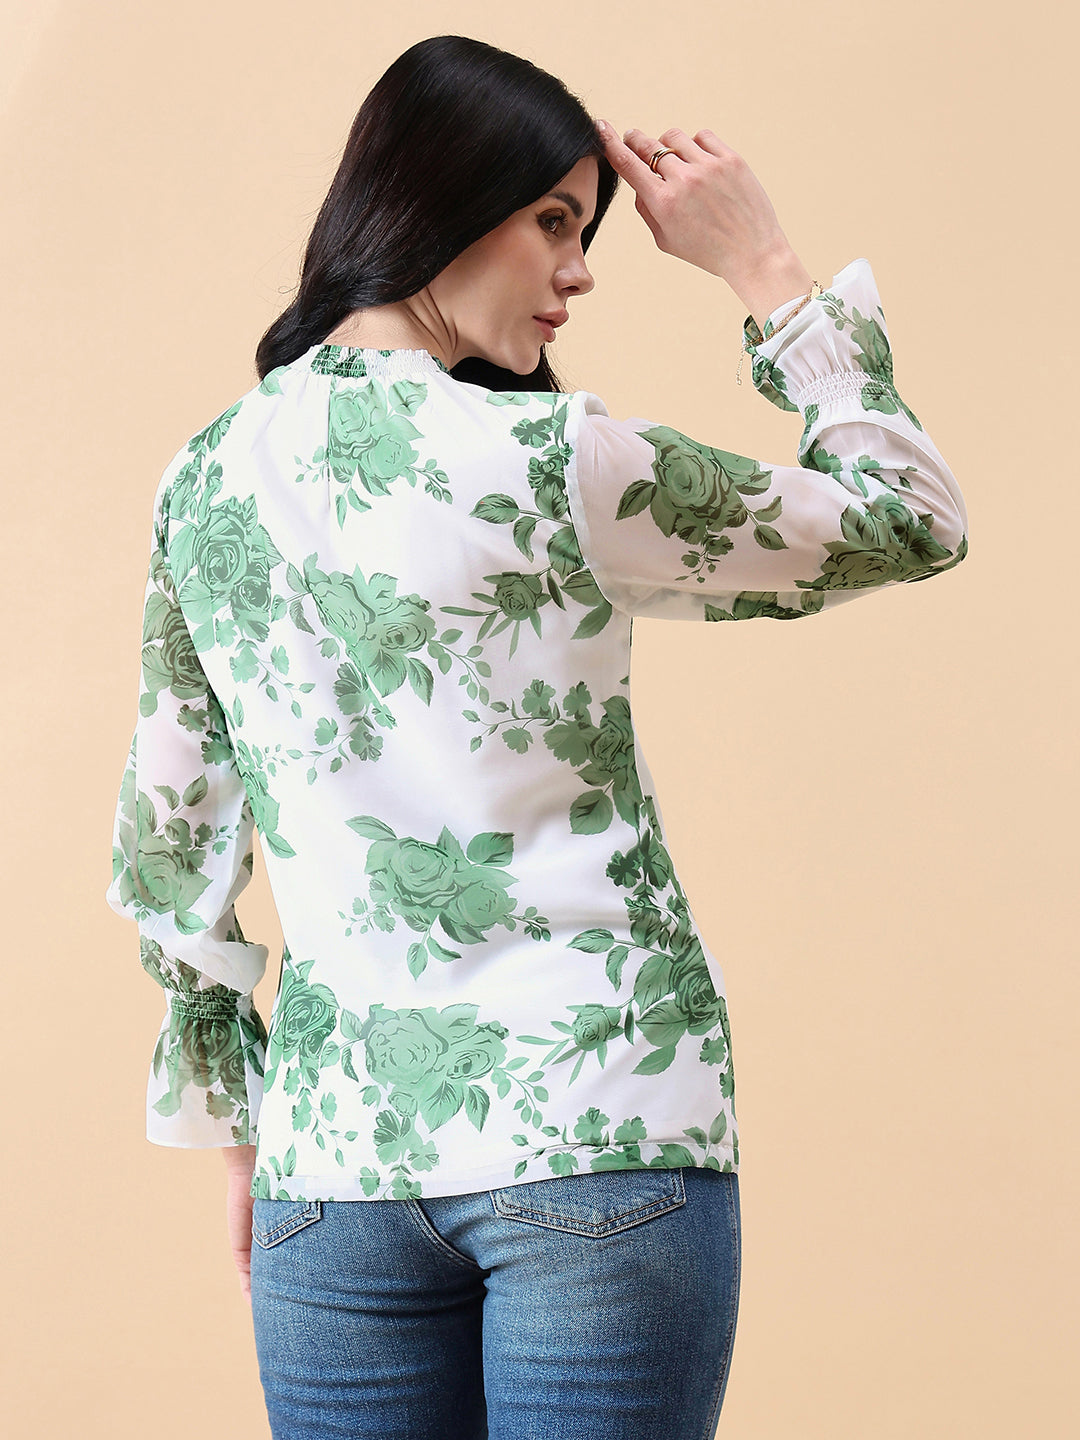 Ban-Neck Ggt Floral Top - Green/ White